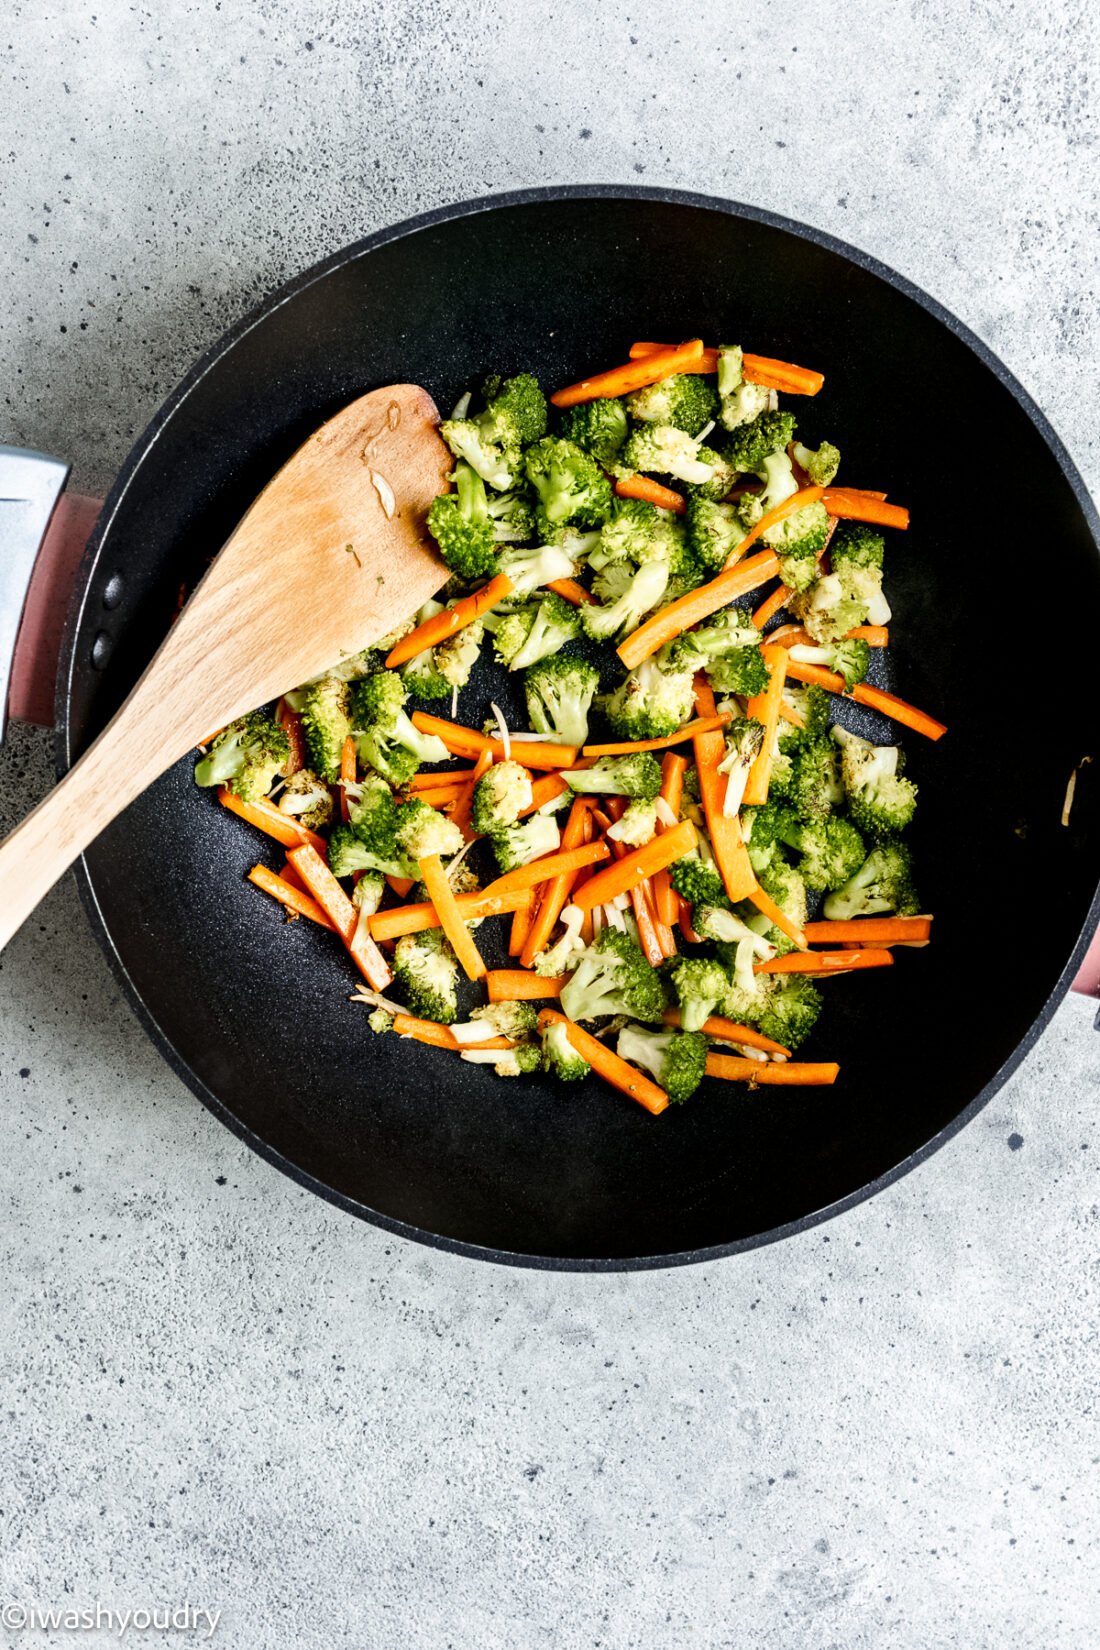 broccoli and carrots in a black wok.